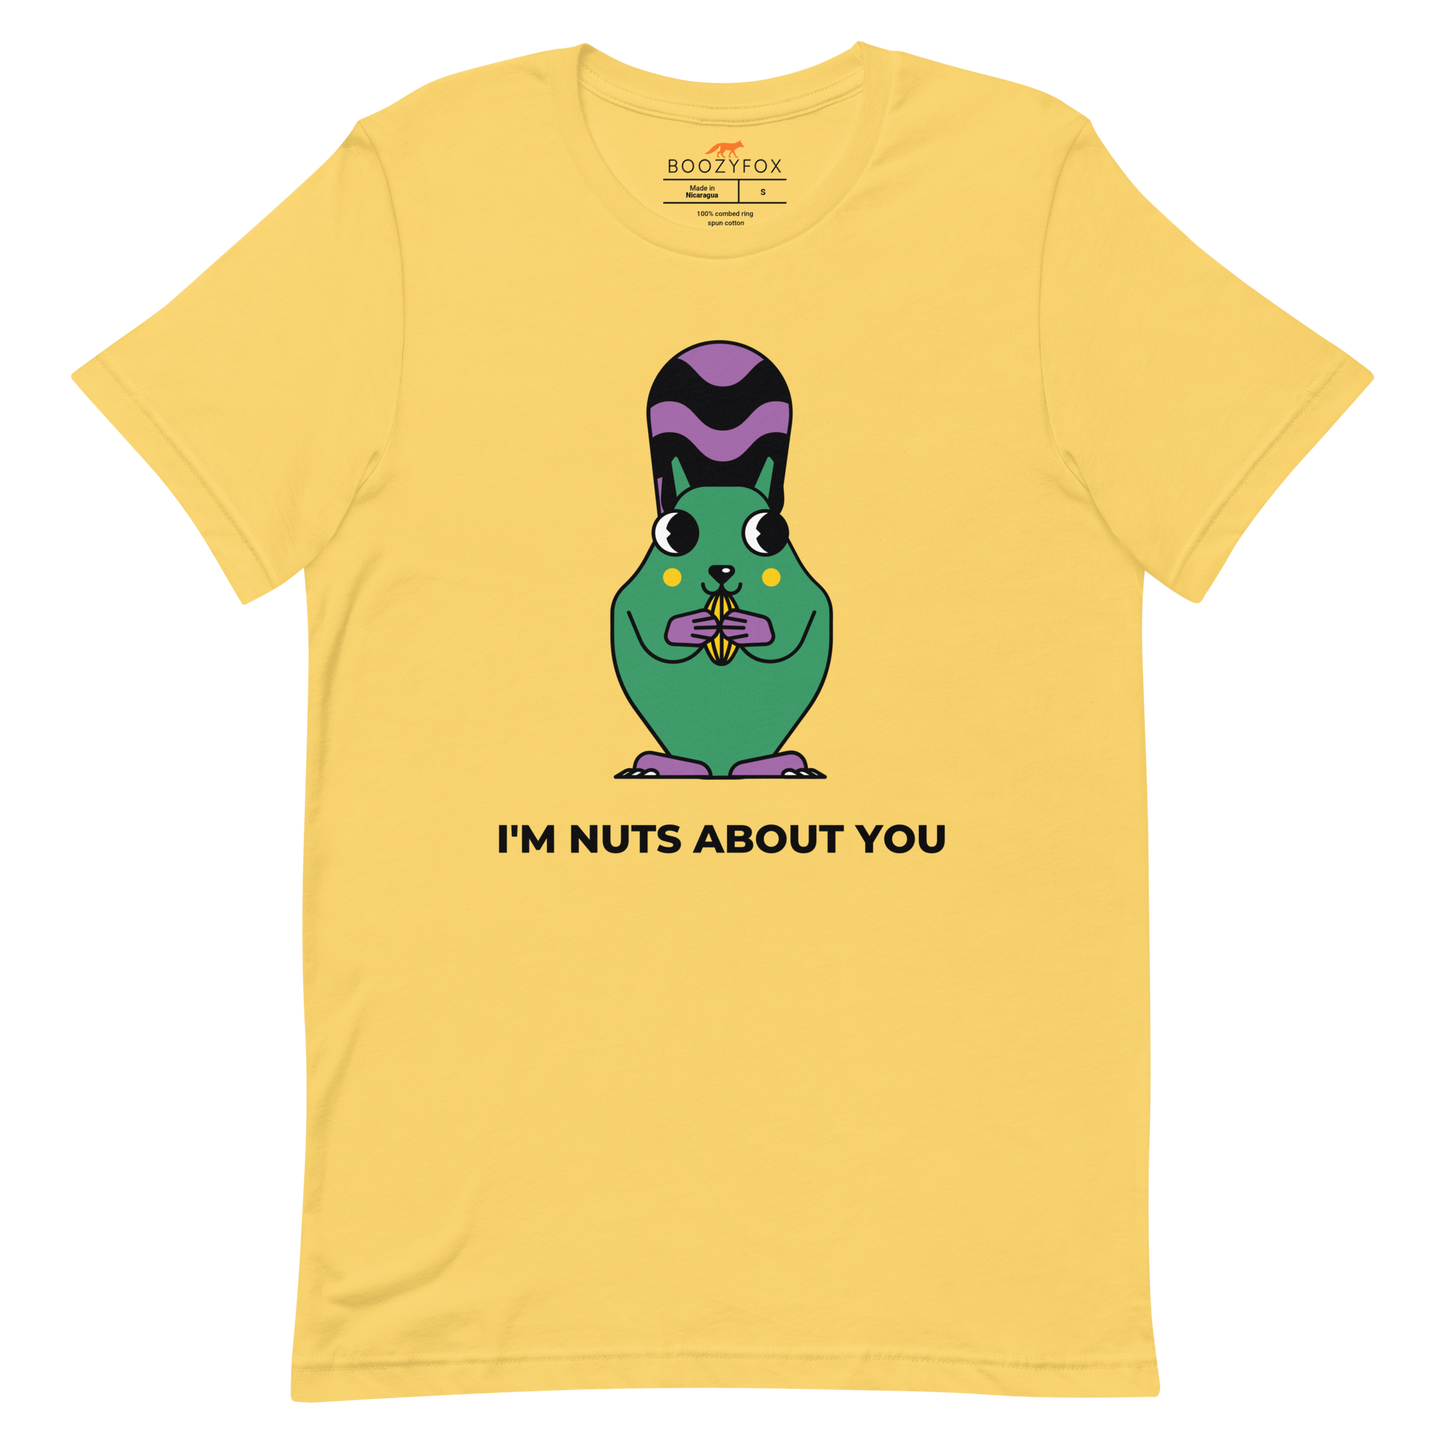 Yellow Premium Squirrel T-Shirt featuring an I'm Nuts About You graphic on the chest - Funny Graphic Squirrel Tees - Boozy Fox